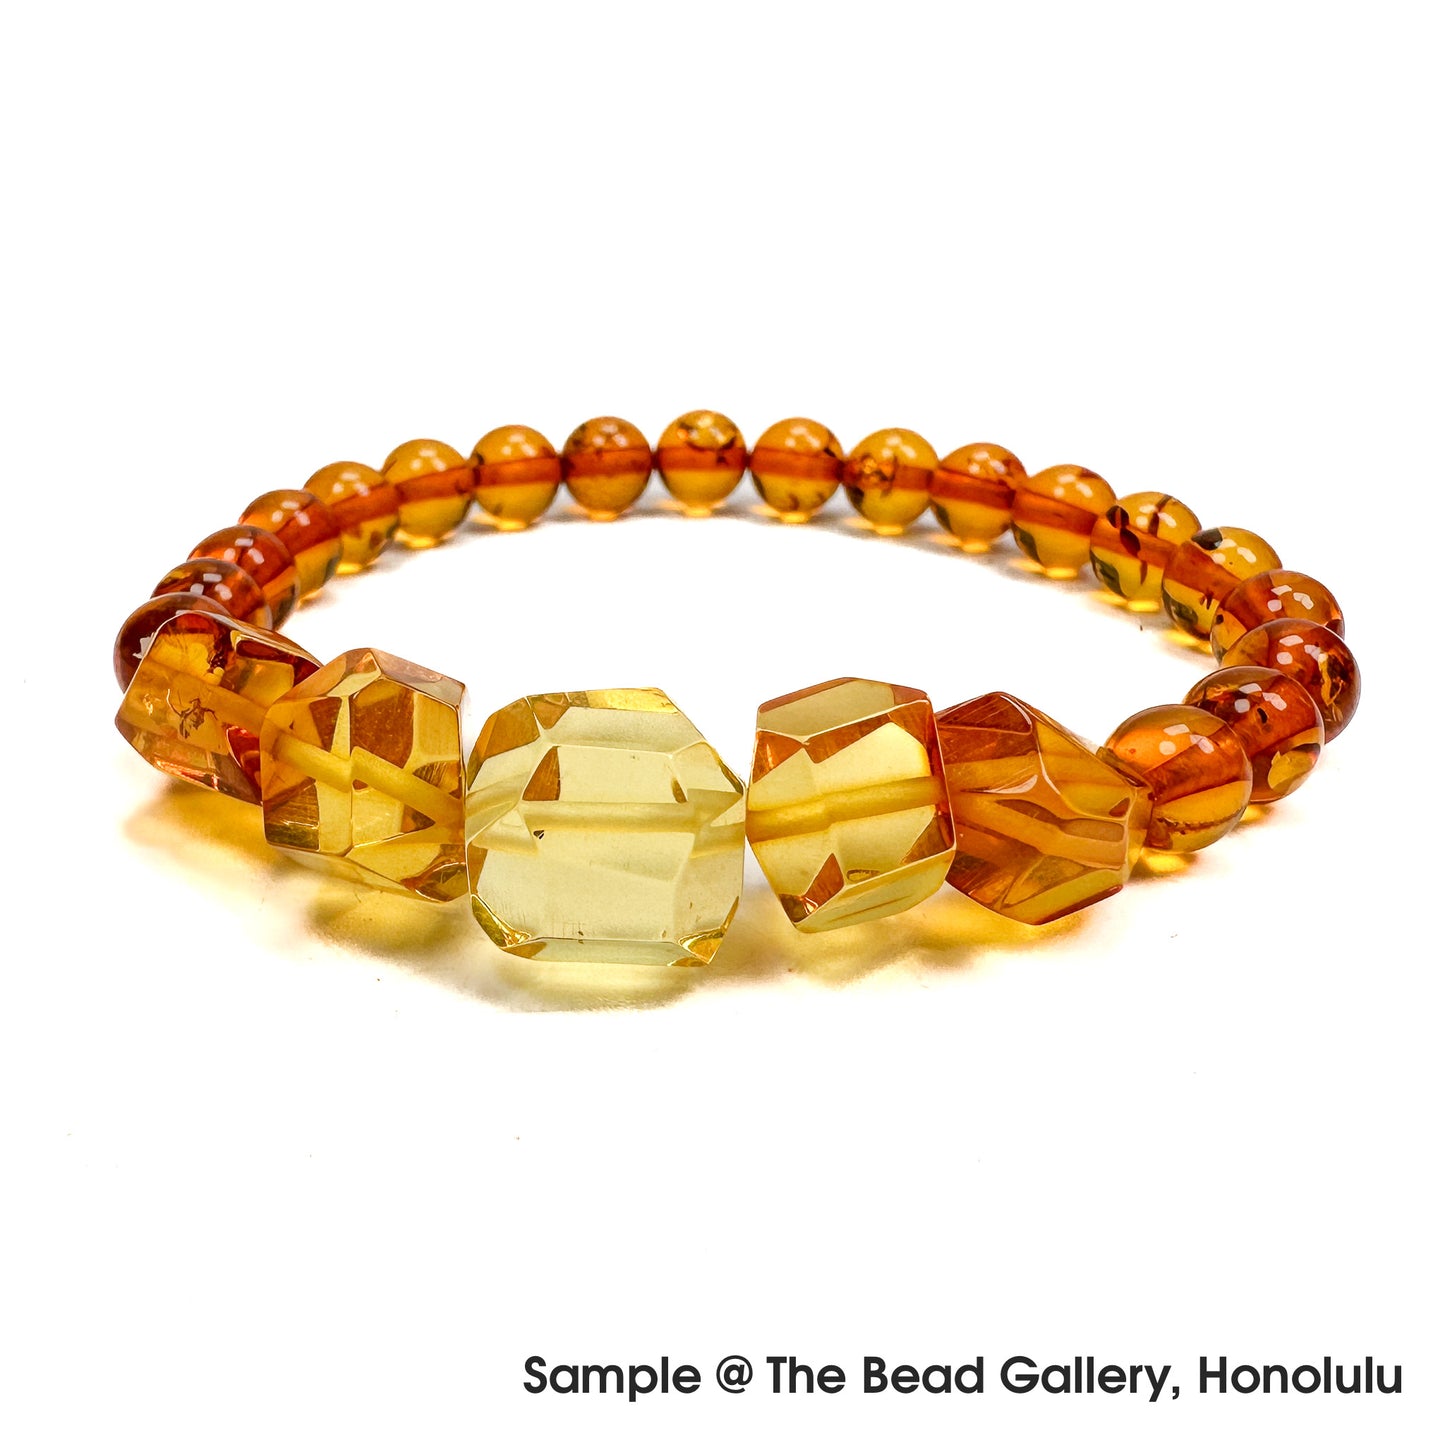 Amber 11-12mm Faceted Bead - 1 pc.